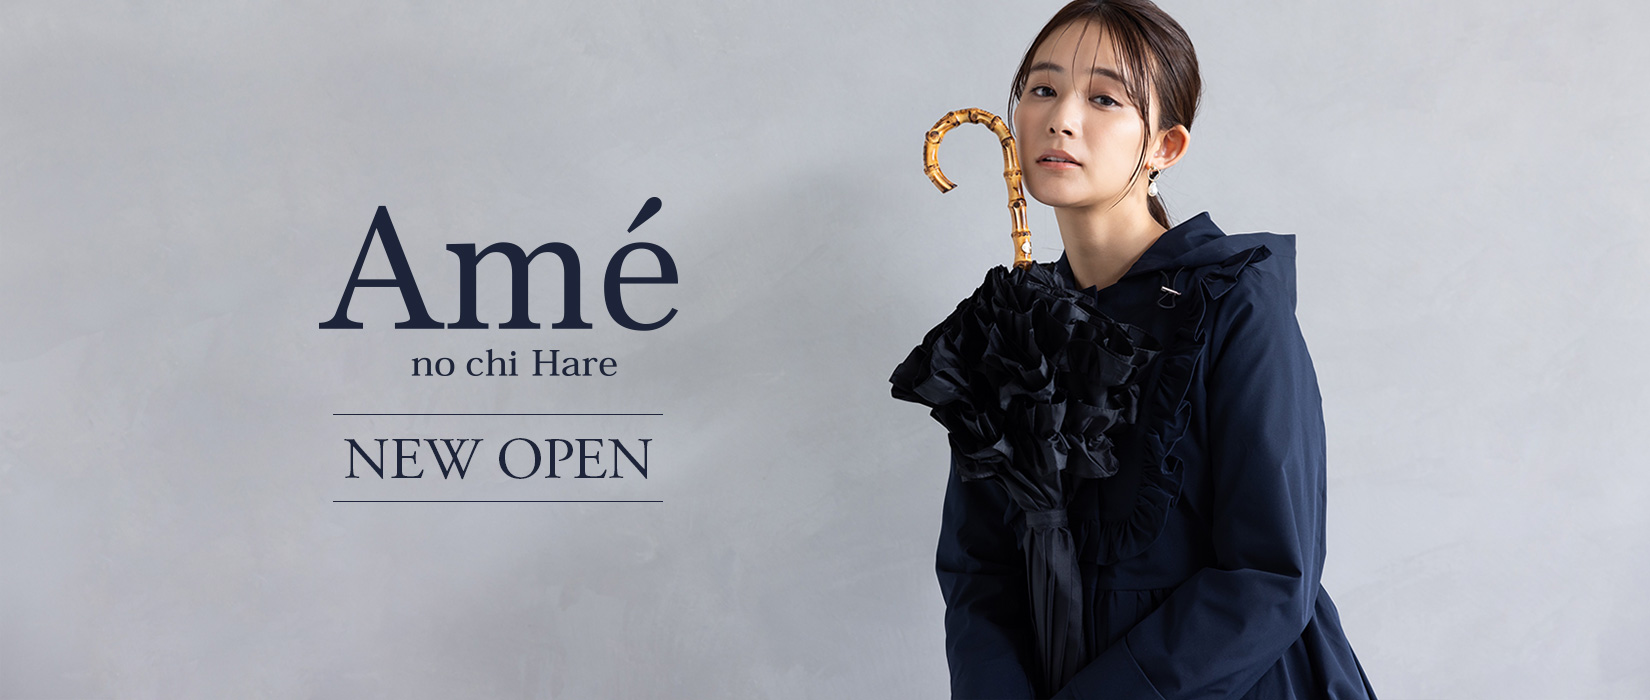 「Ame no chi Hare（アメノチハレ）」LIMITED STORE OPEN